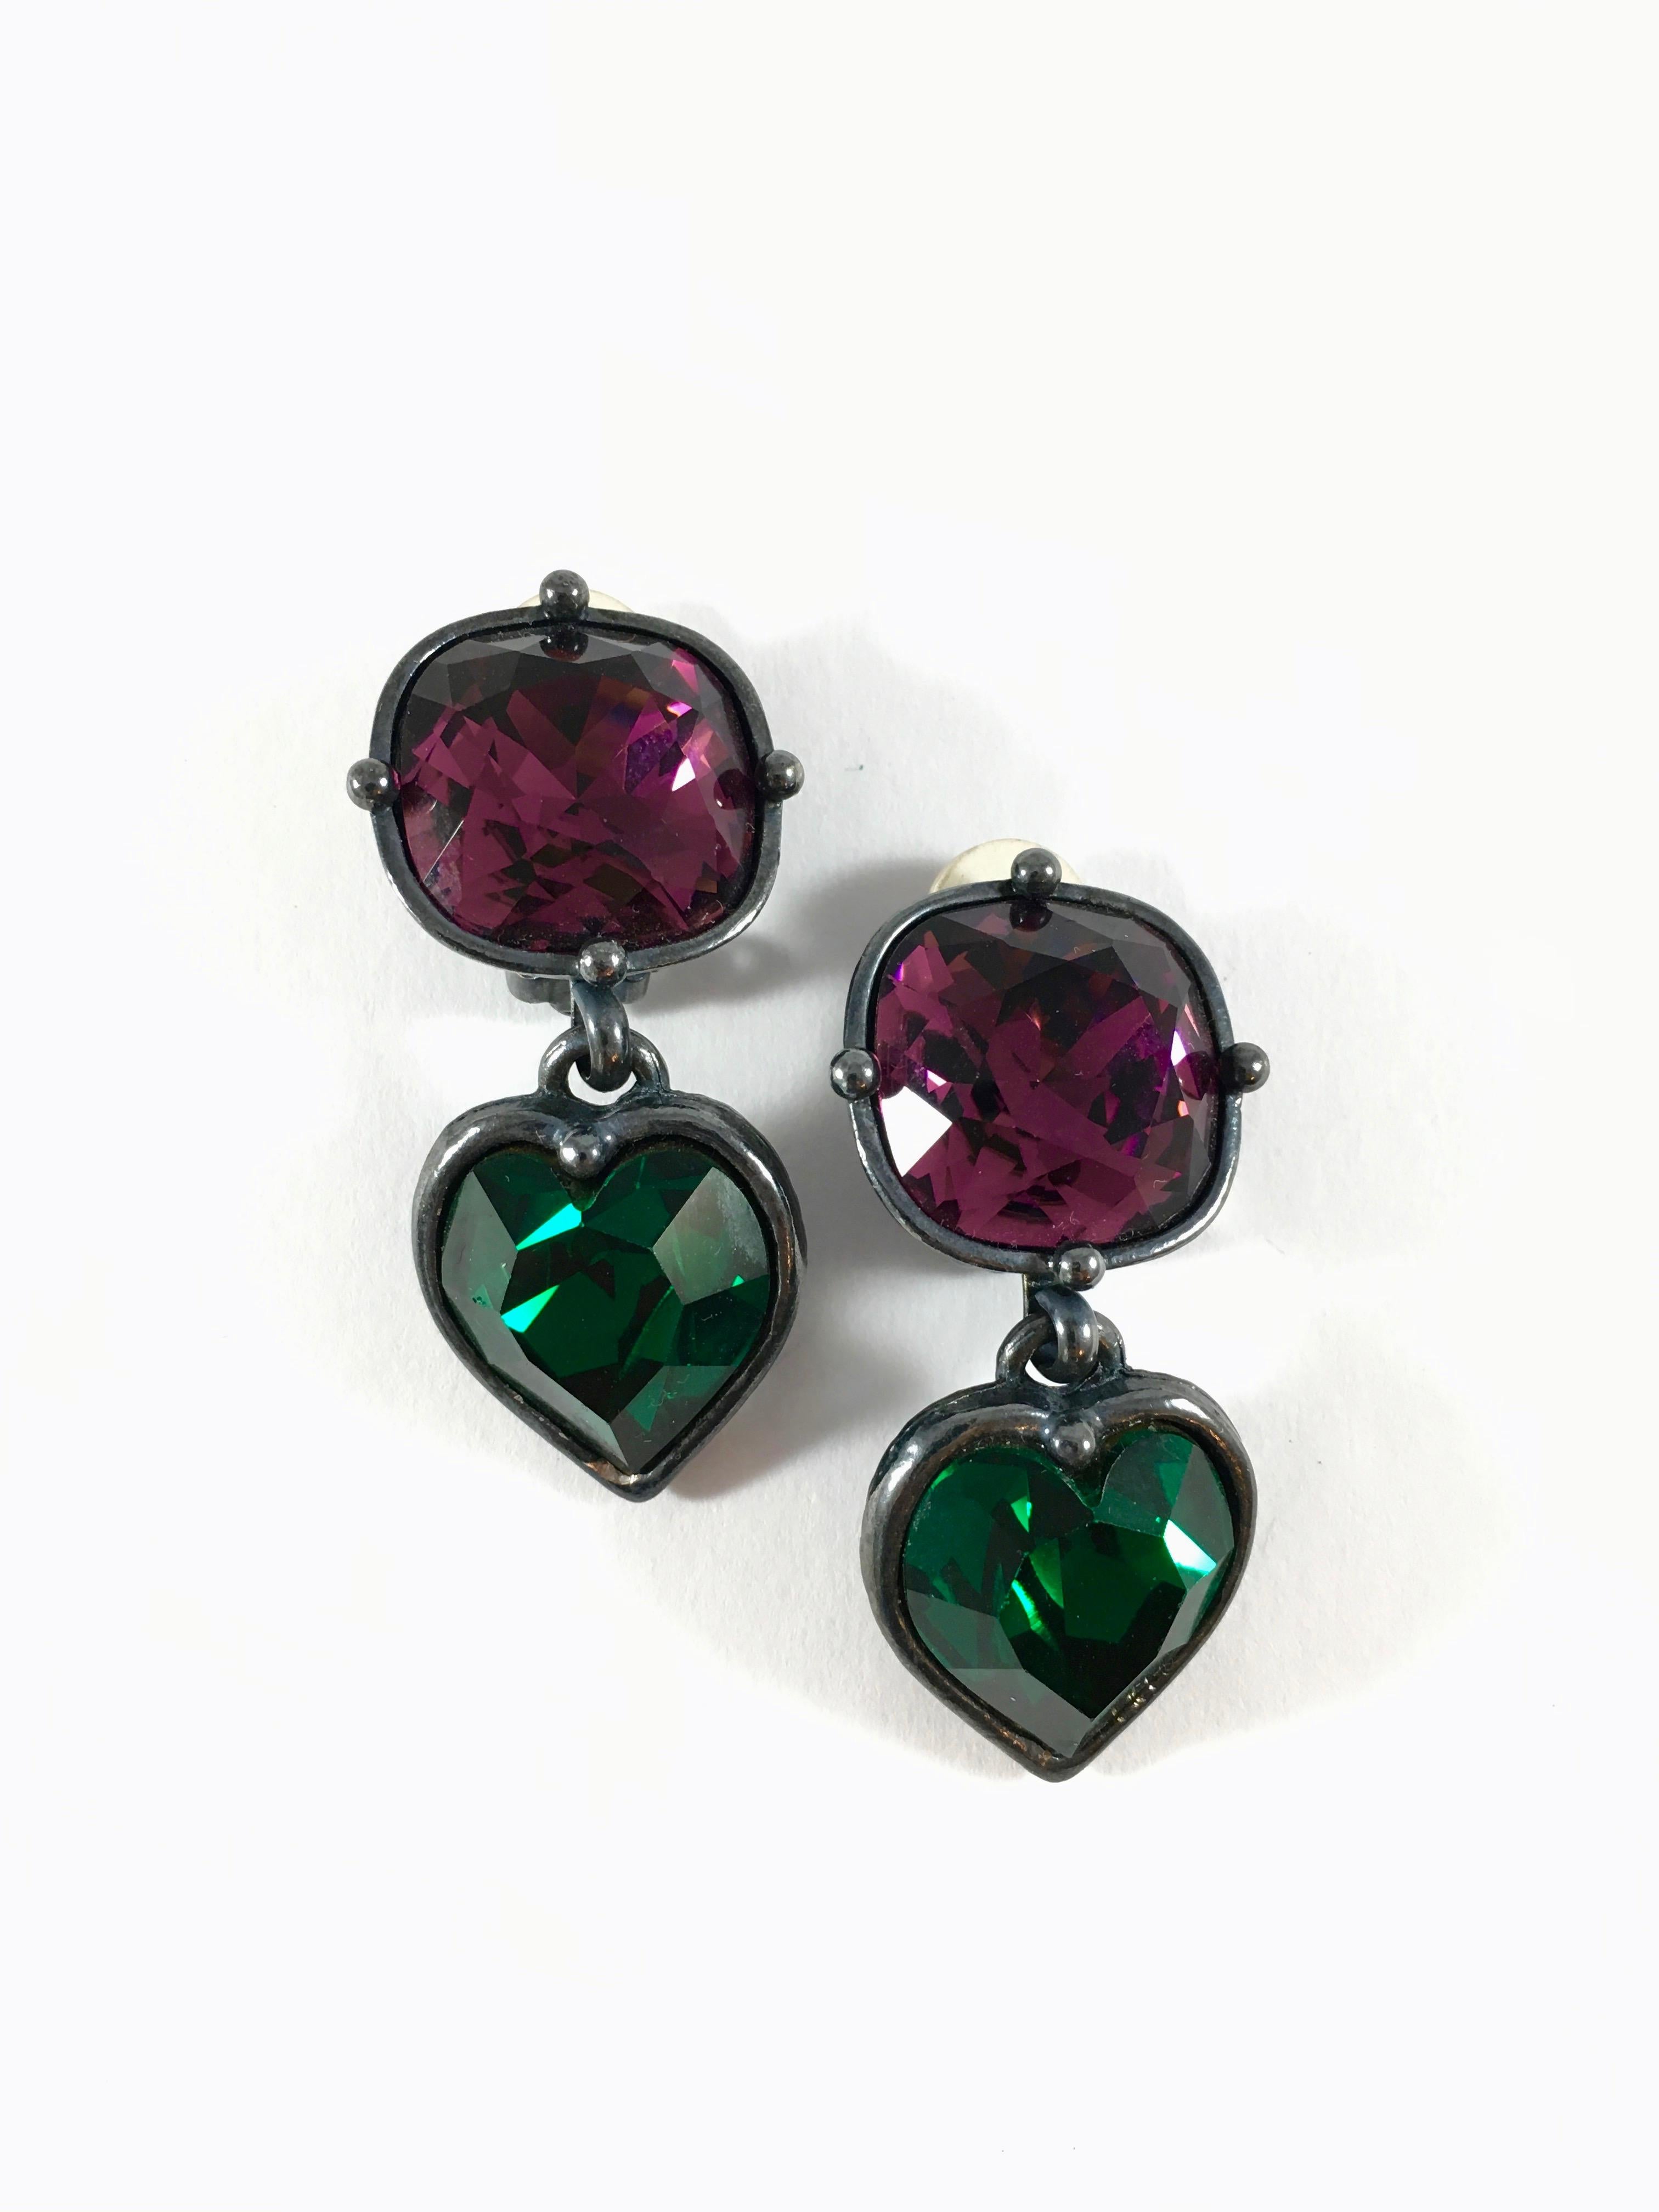 Spectacular Yves Saint Laurent Rive Gauche earrings from the 1980s. They have a charcoal gray gunmetal finish and each earring has a faceted purple square shaped stone with a green faceted heart shaped stone hanging from it. They measure 2 inches